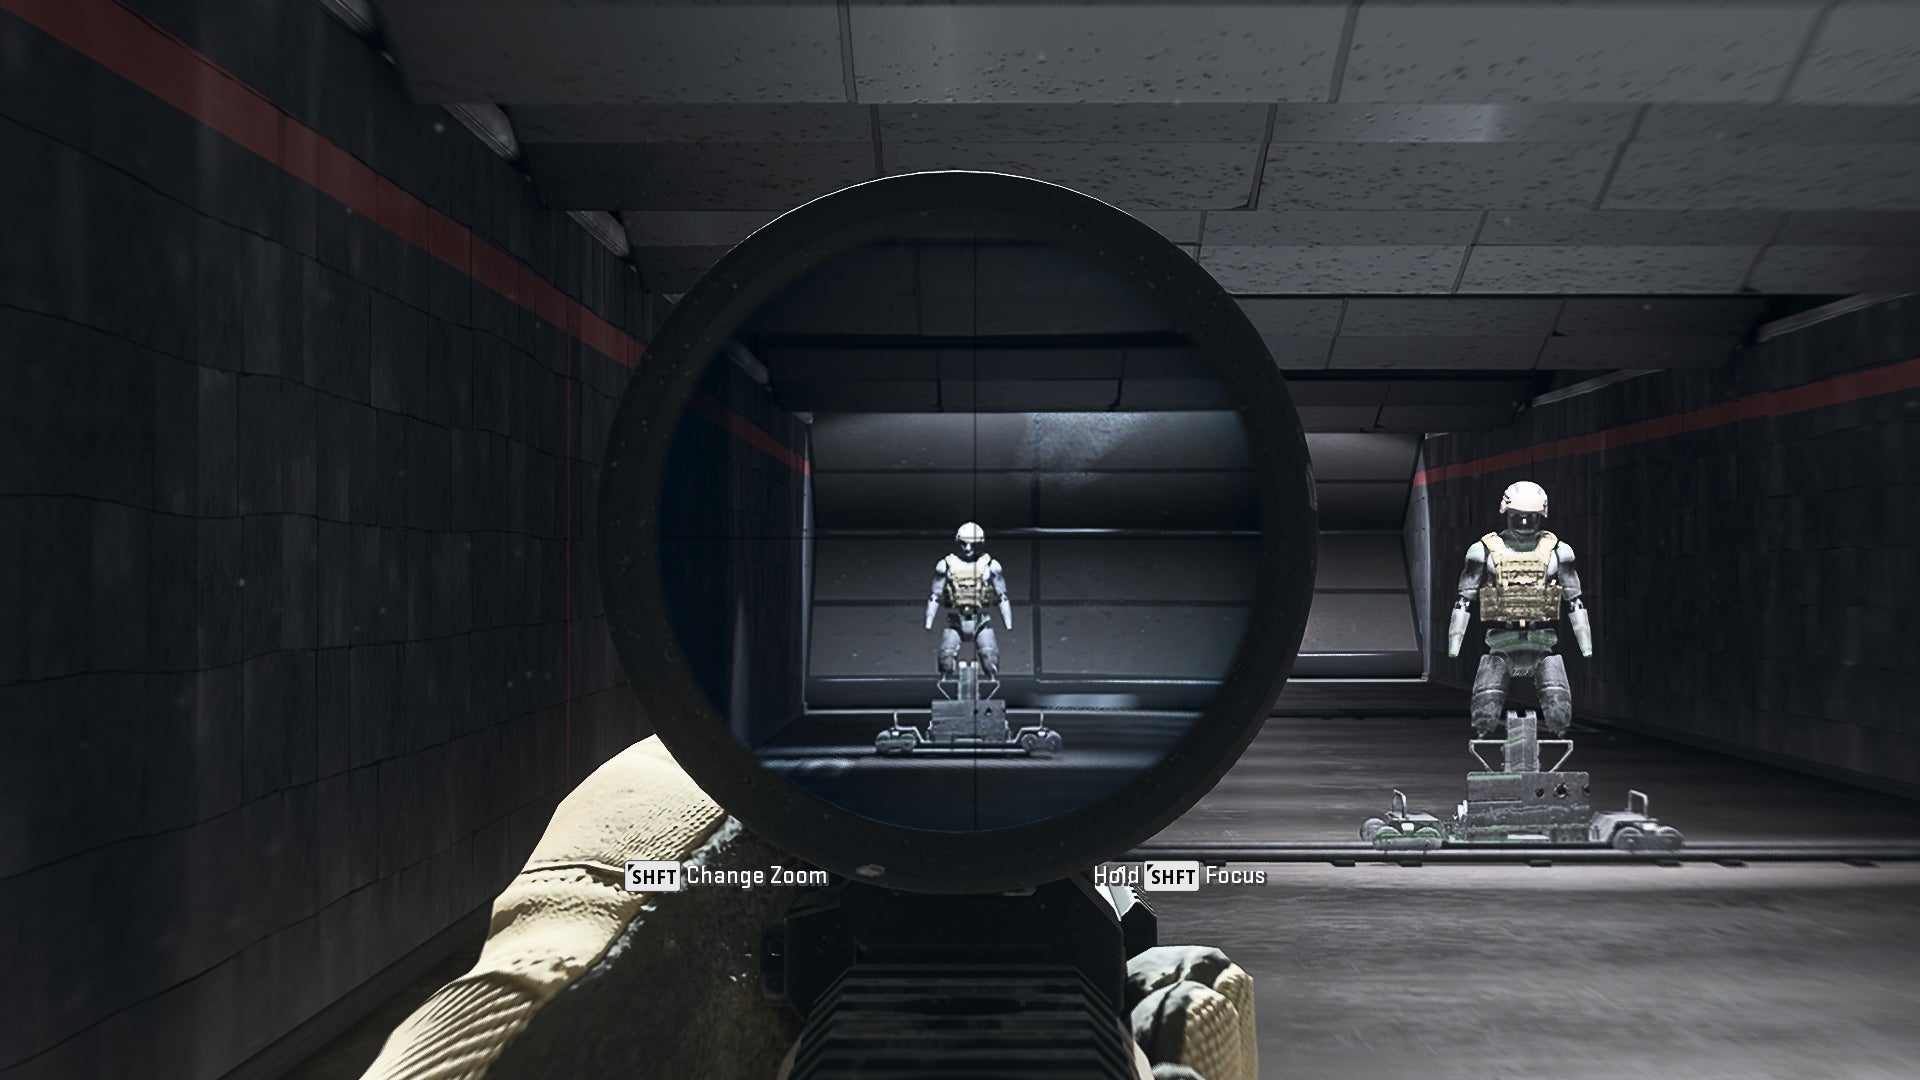 The player in Warzone 2.0 aims at a training dummy using the Luca Bandera Scope optic attachment.